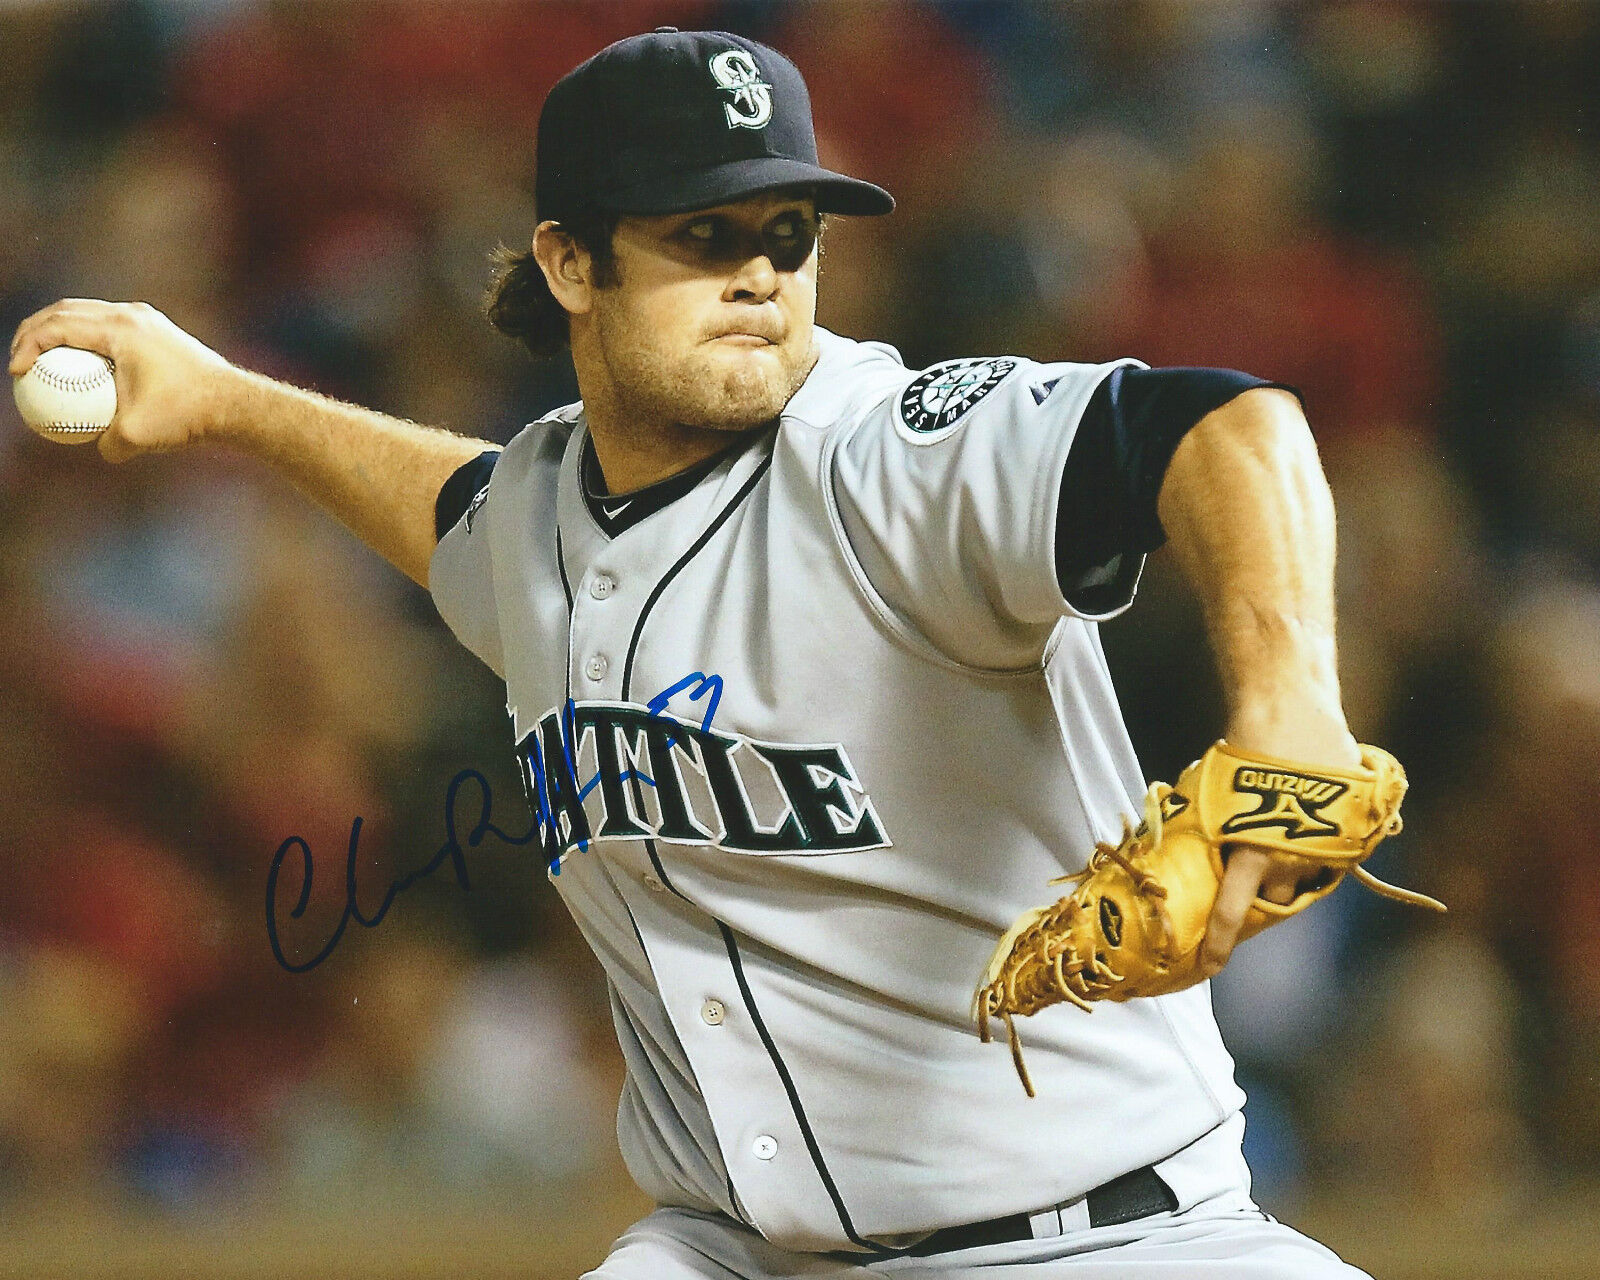 **GFA Seattle Mariners *CHANCE RUFFIN* Signed 8x10 Photo Poster painting C1 COA**